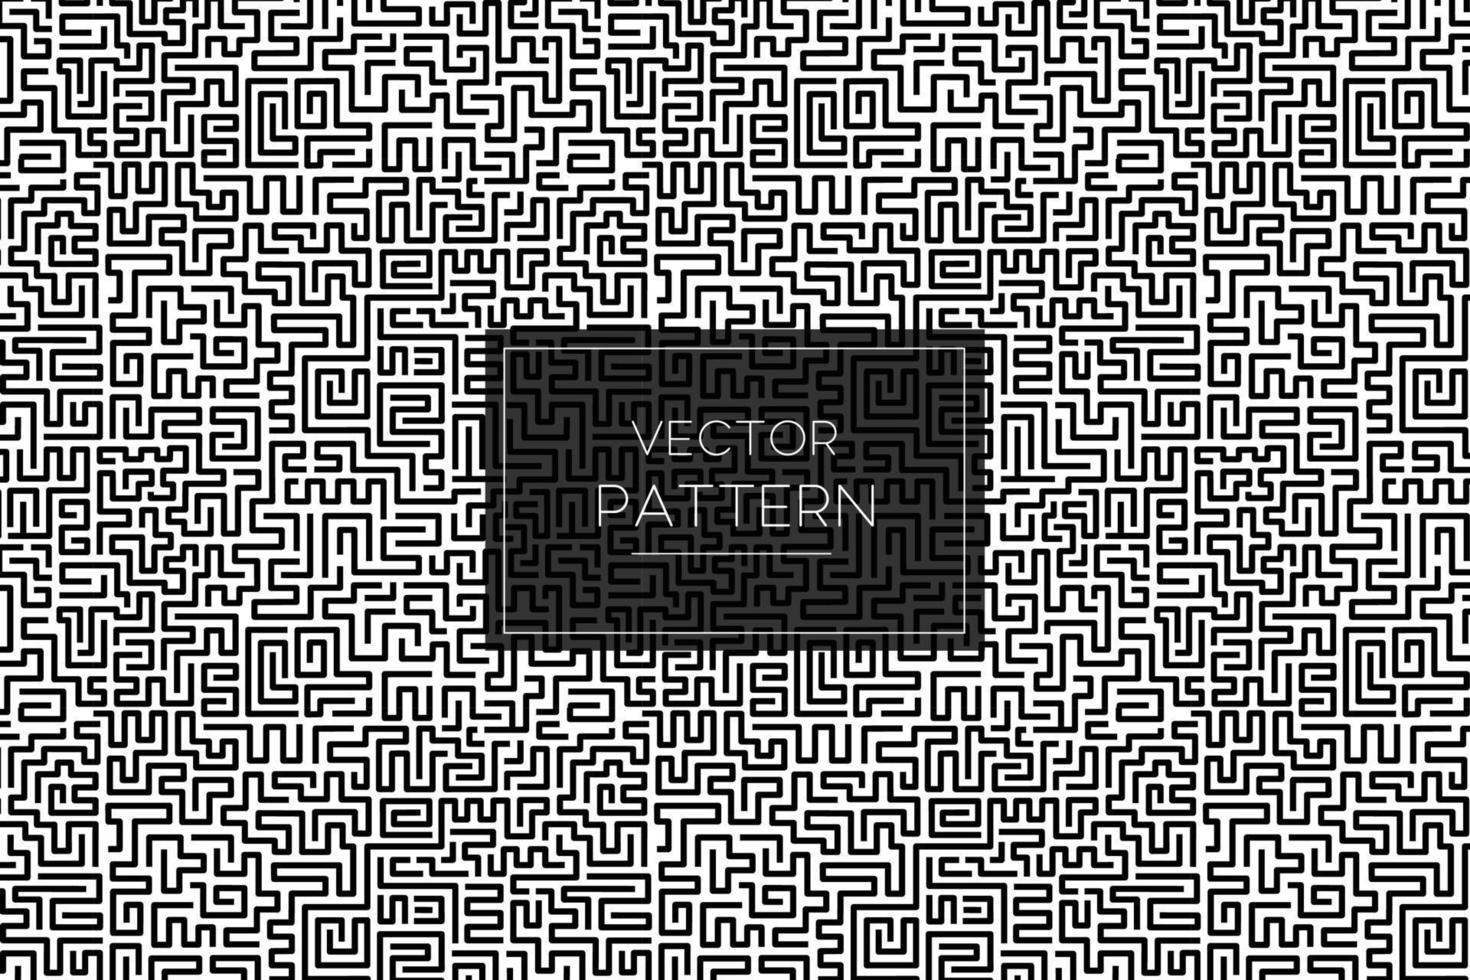 Jumble maze black lines seamless repeat pattern on a white background vector